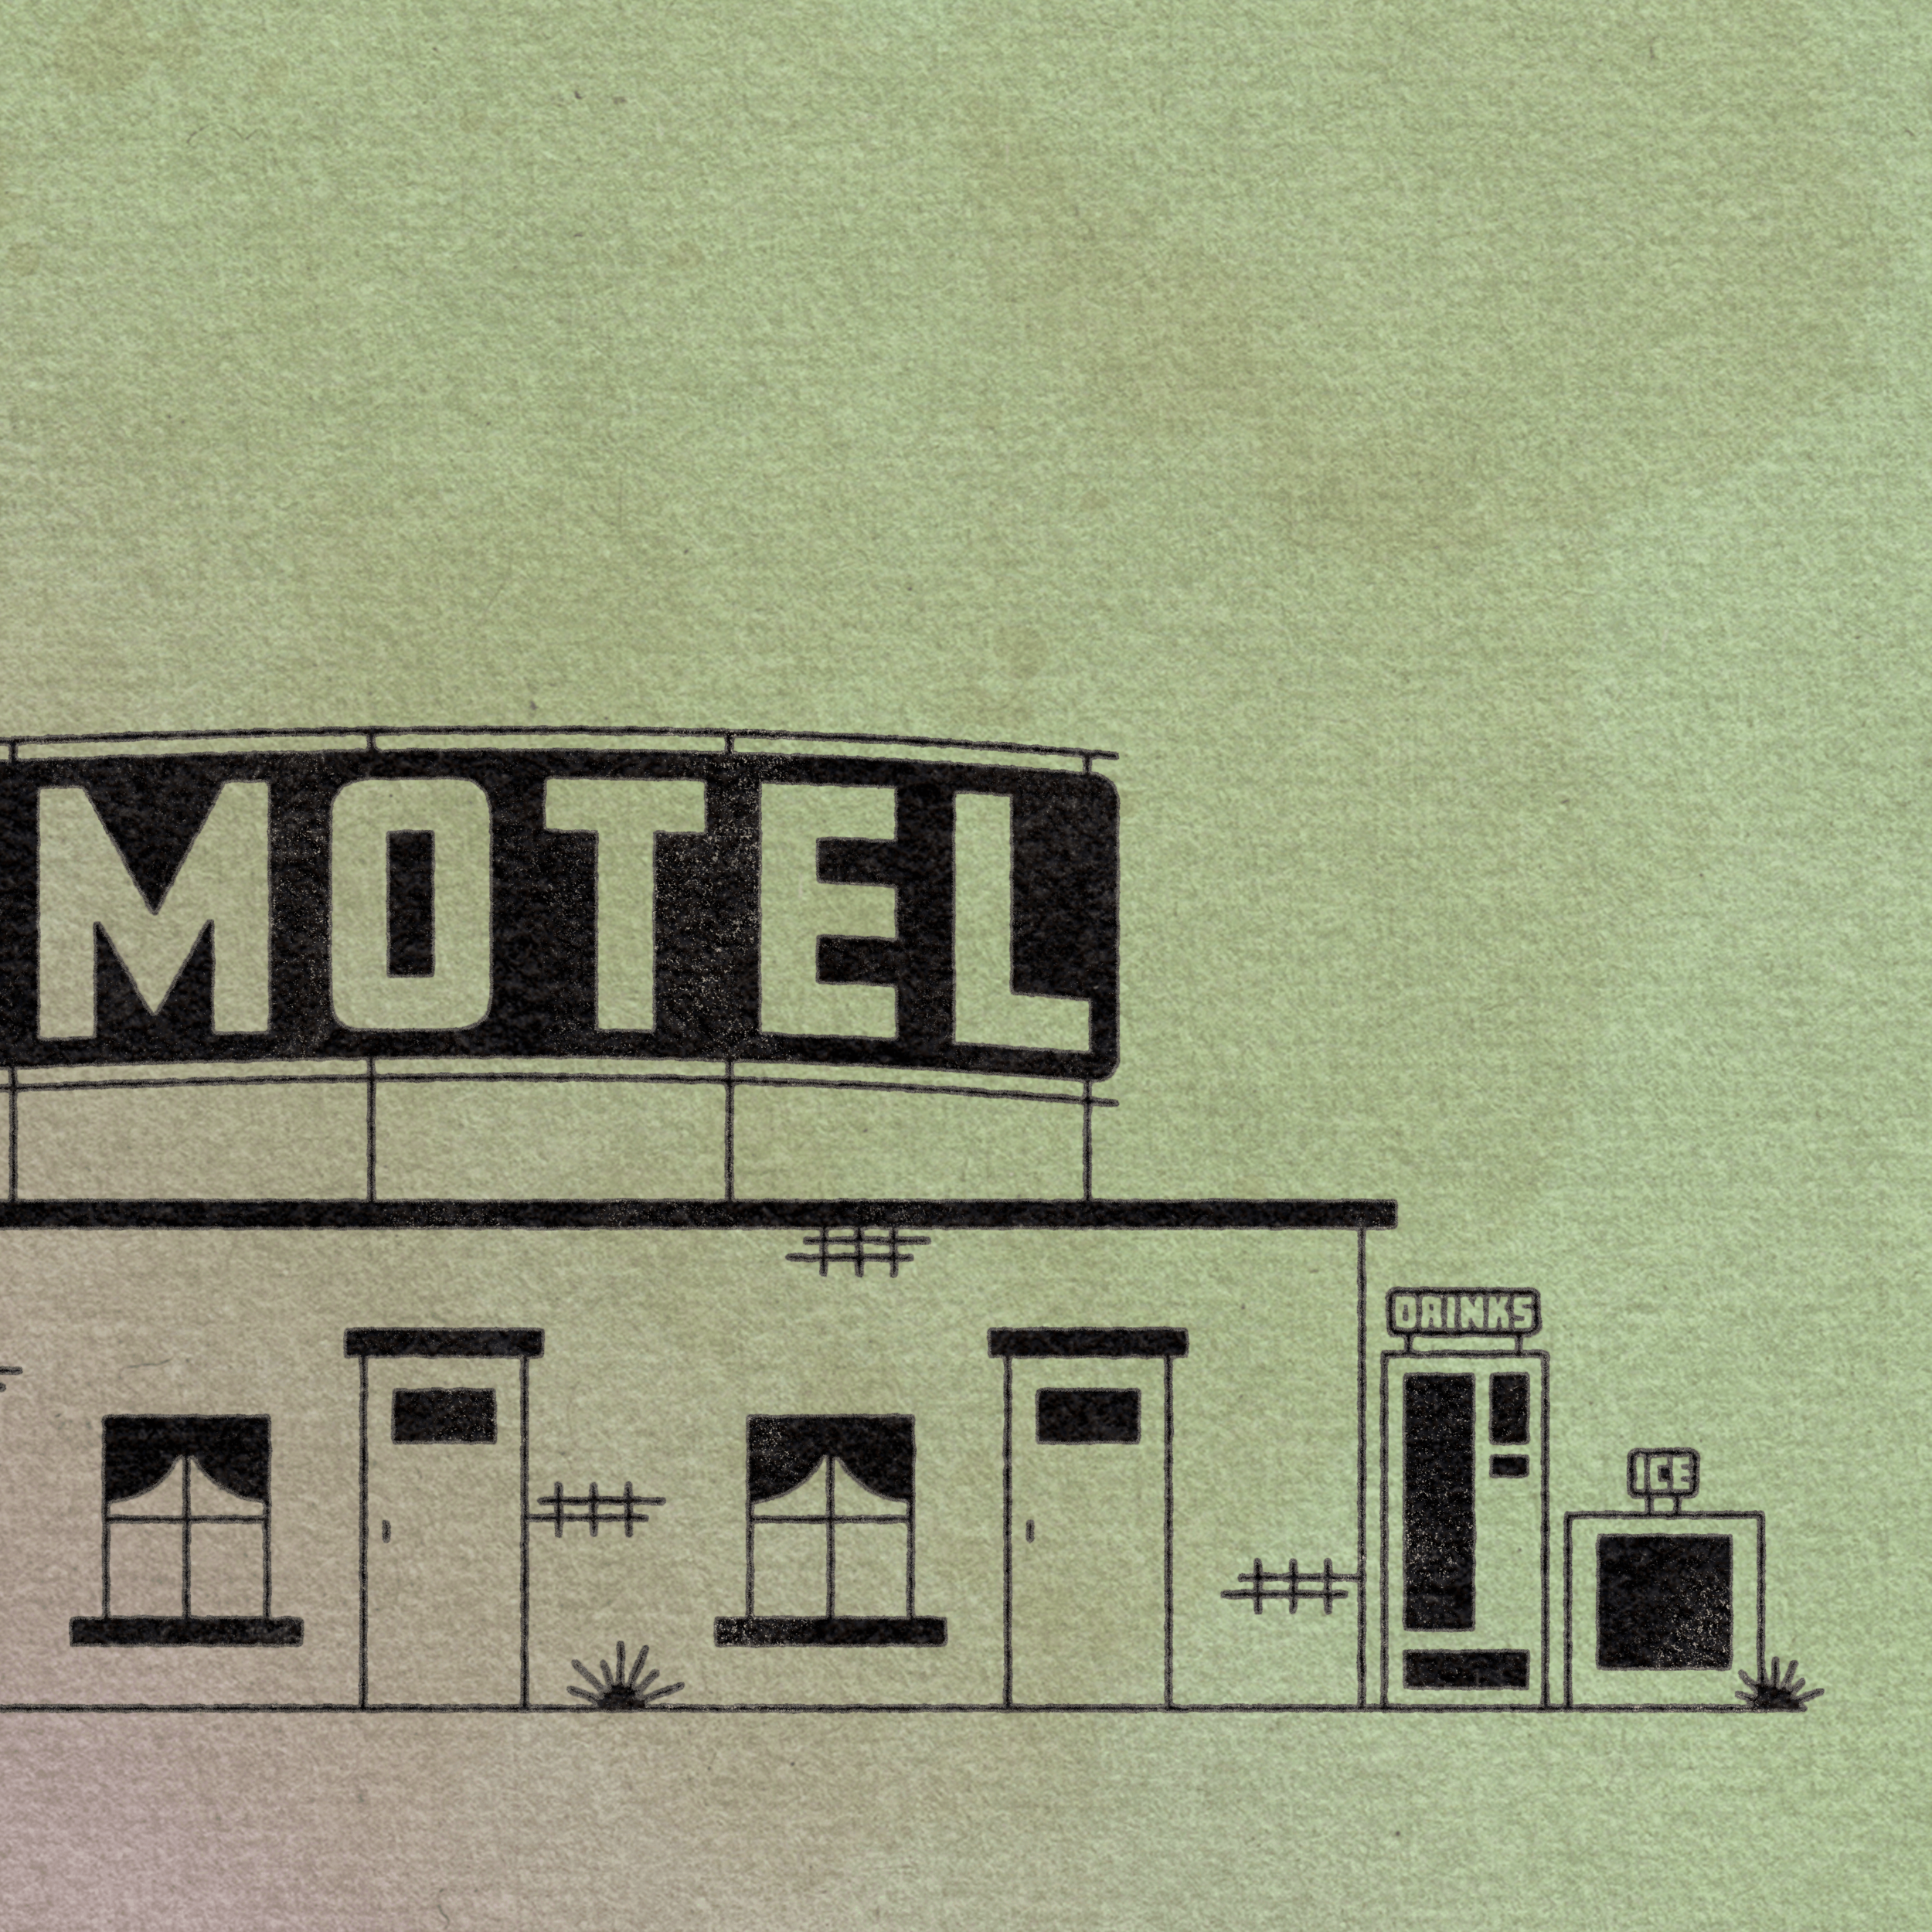 LuckyCatMotel_Texture_Insta_3.png